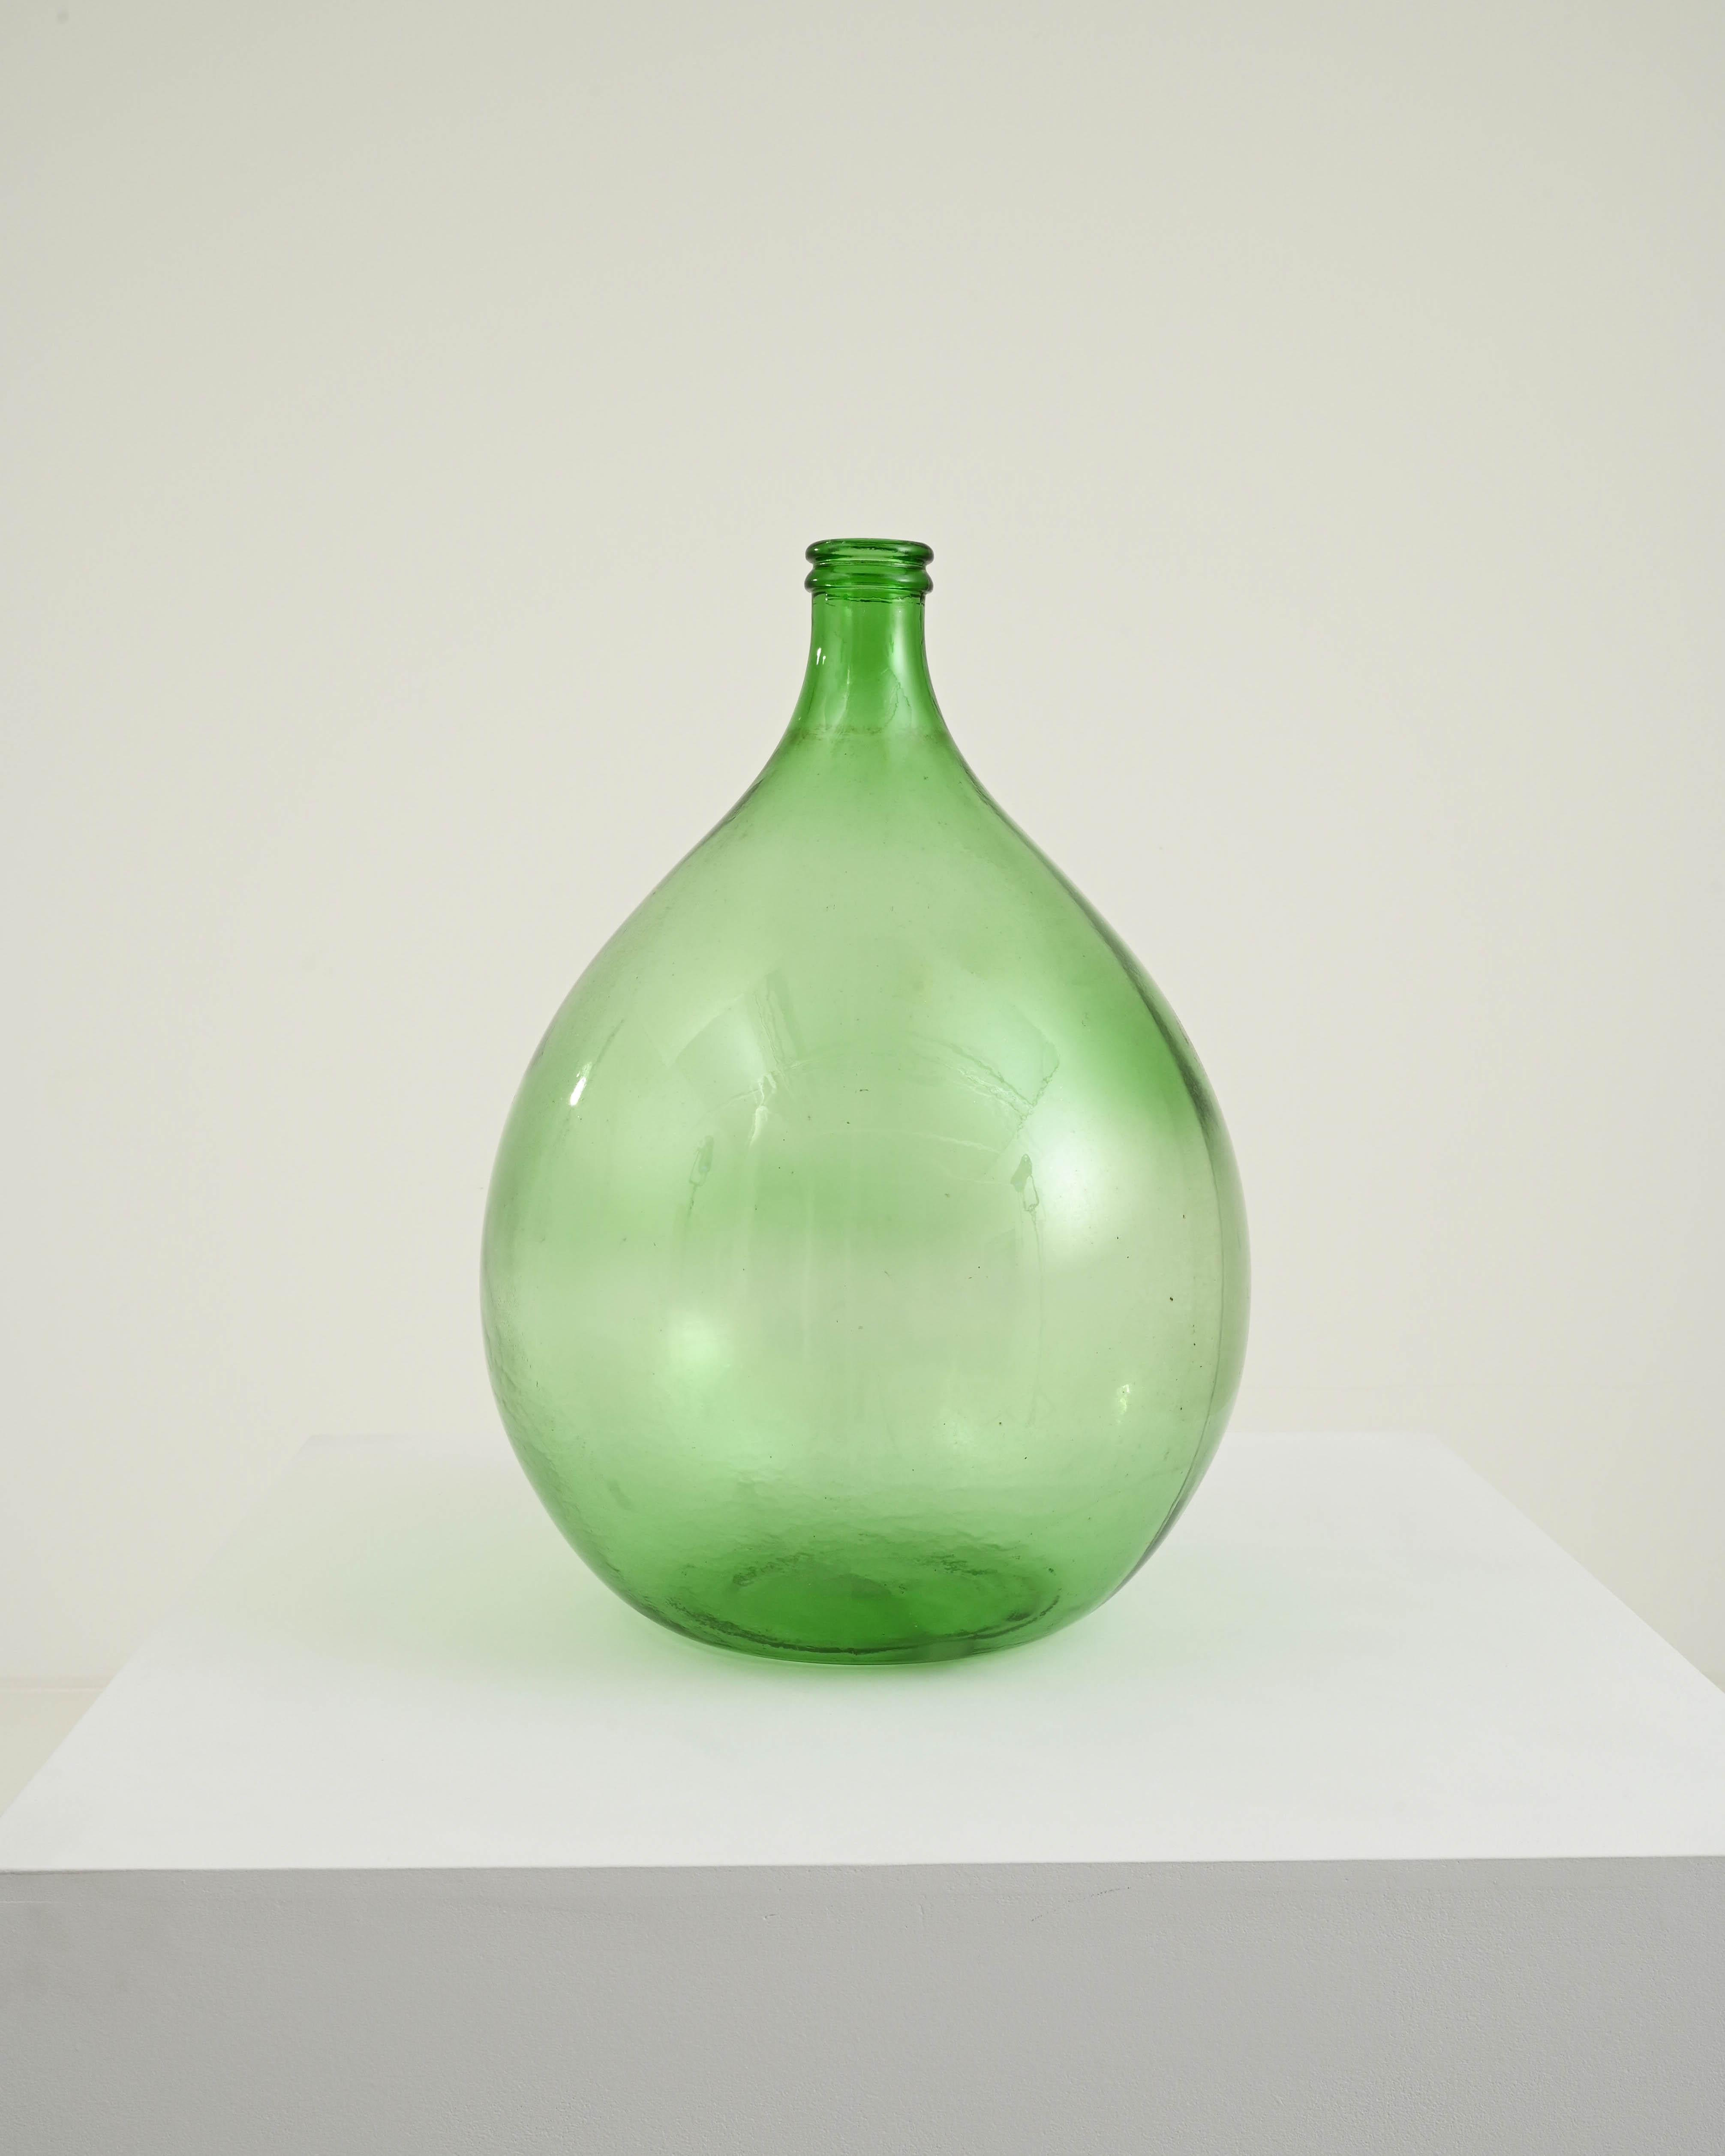 Also called a ‘demijohn’ or ‘carboy’ this glass vessel was made in France around 1900 for the purpose of fermenting, conditioning or transporting alcoholic beverages. A slender bottleneck blooms out into a broad globe shape; the absinthe-green tone